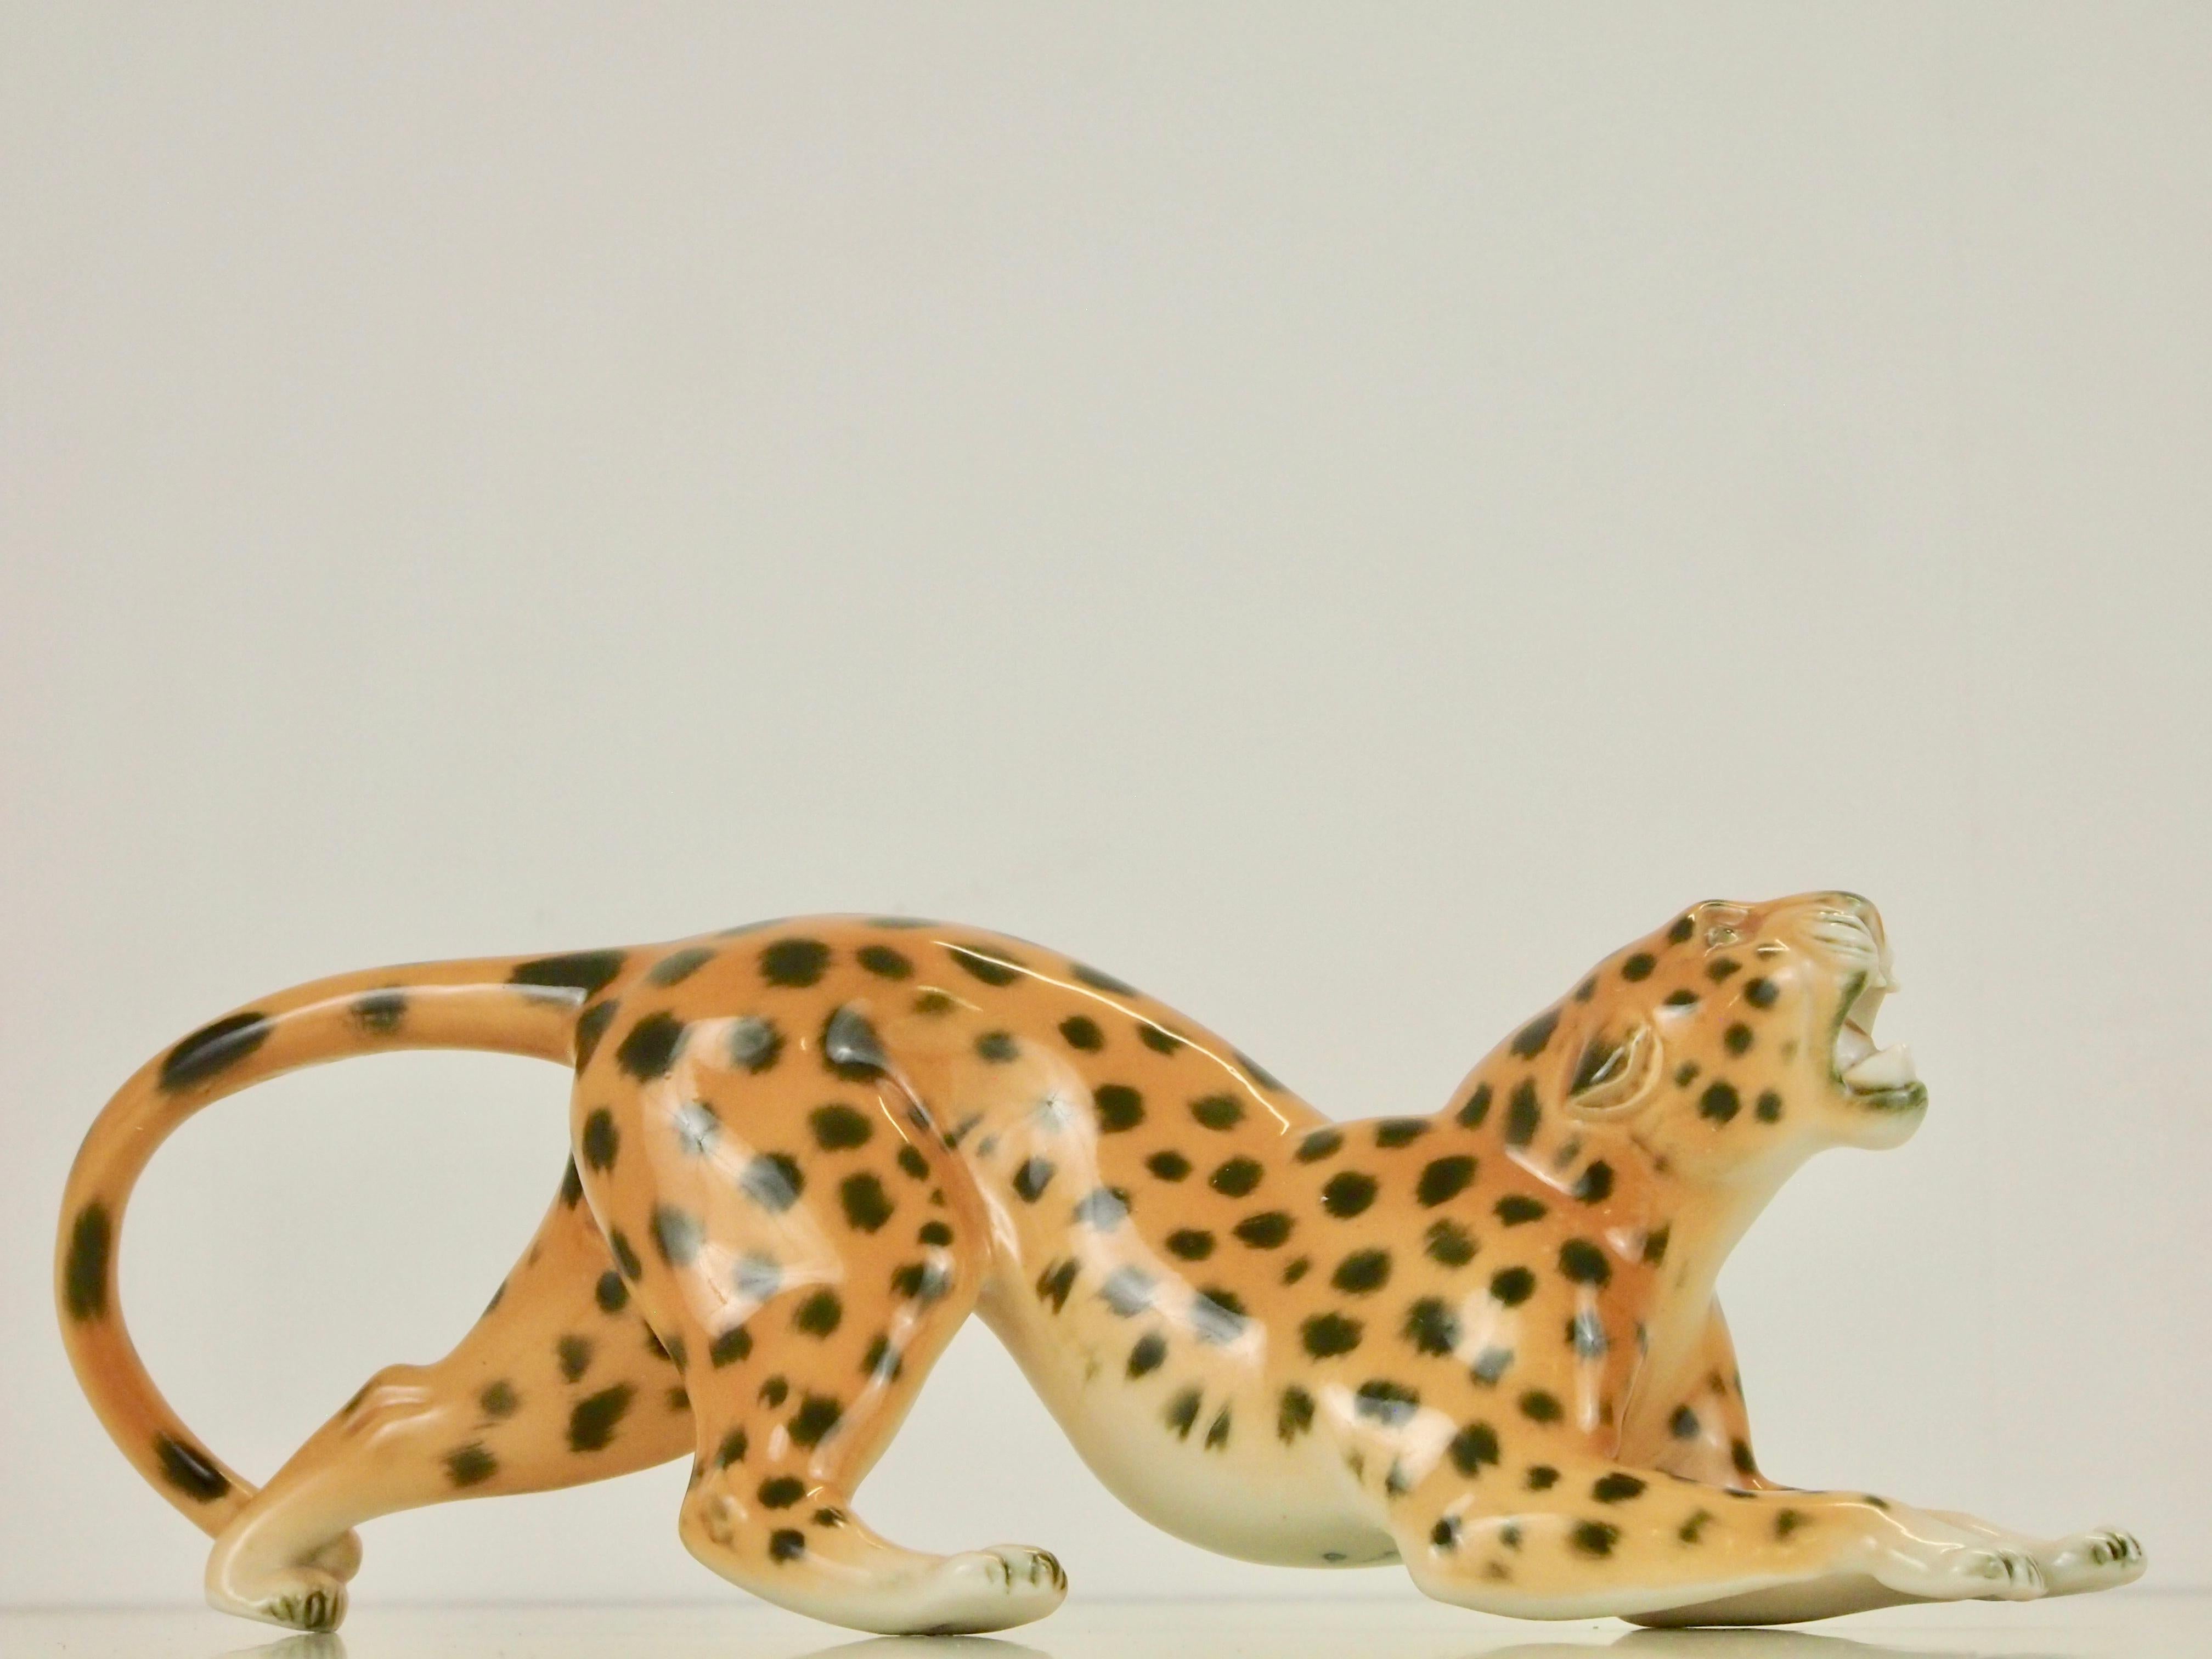 Lovely vintage midcentury German porcelain figurine depicting a growling wild cat/leppard.

This beautiful high quality porcelain piece has been produced by the Dresden porcelain manufacturer Karl ENS Volkstedt in the former century and is still